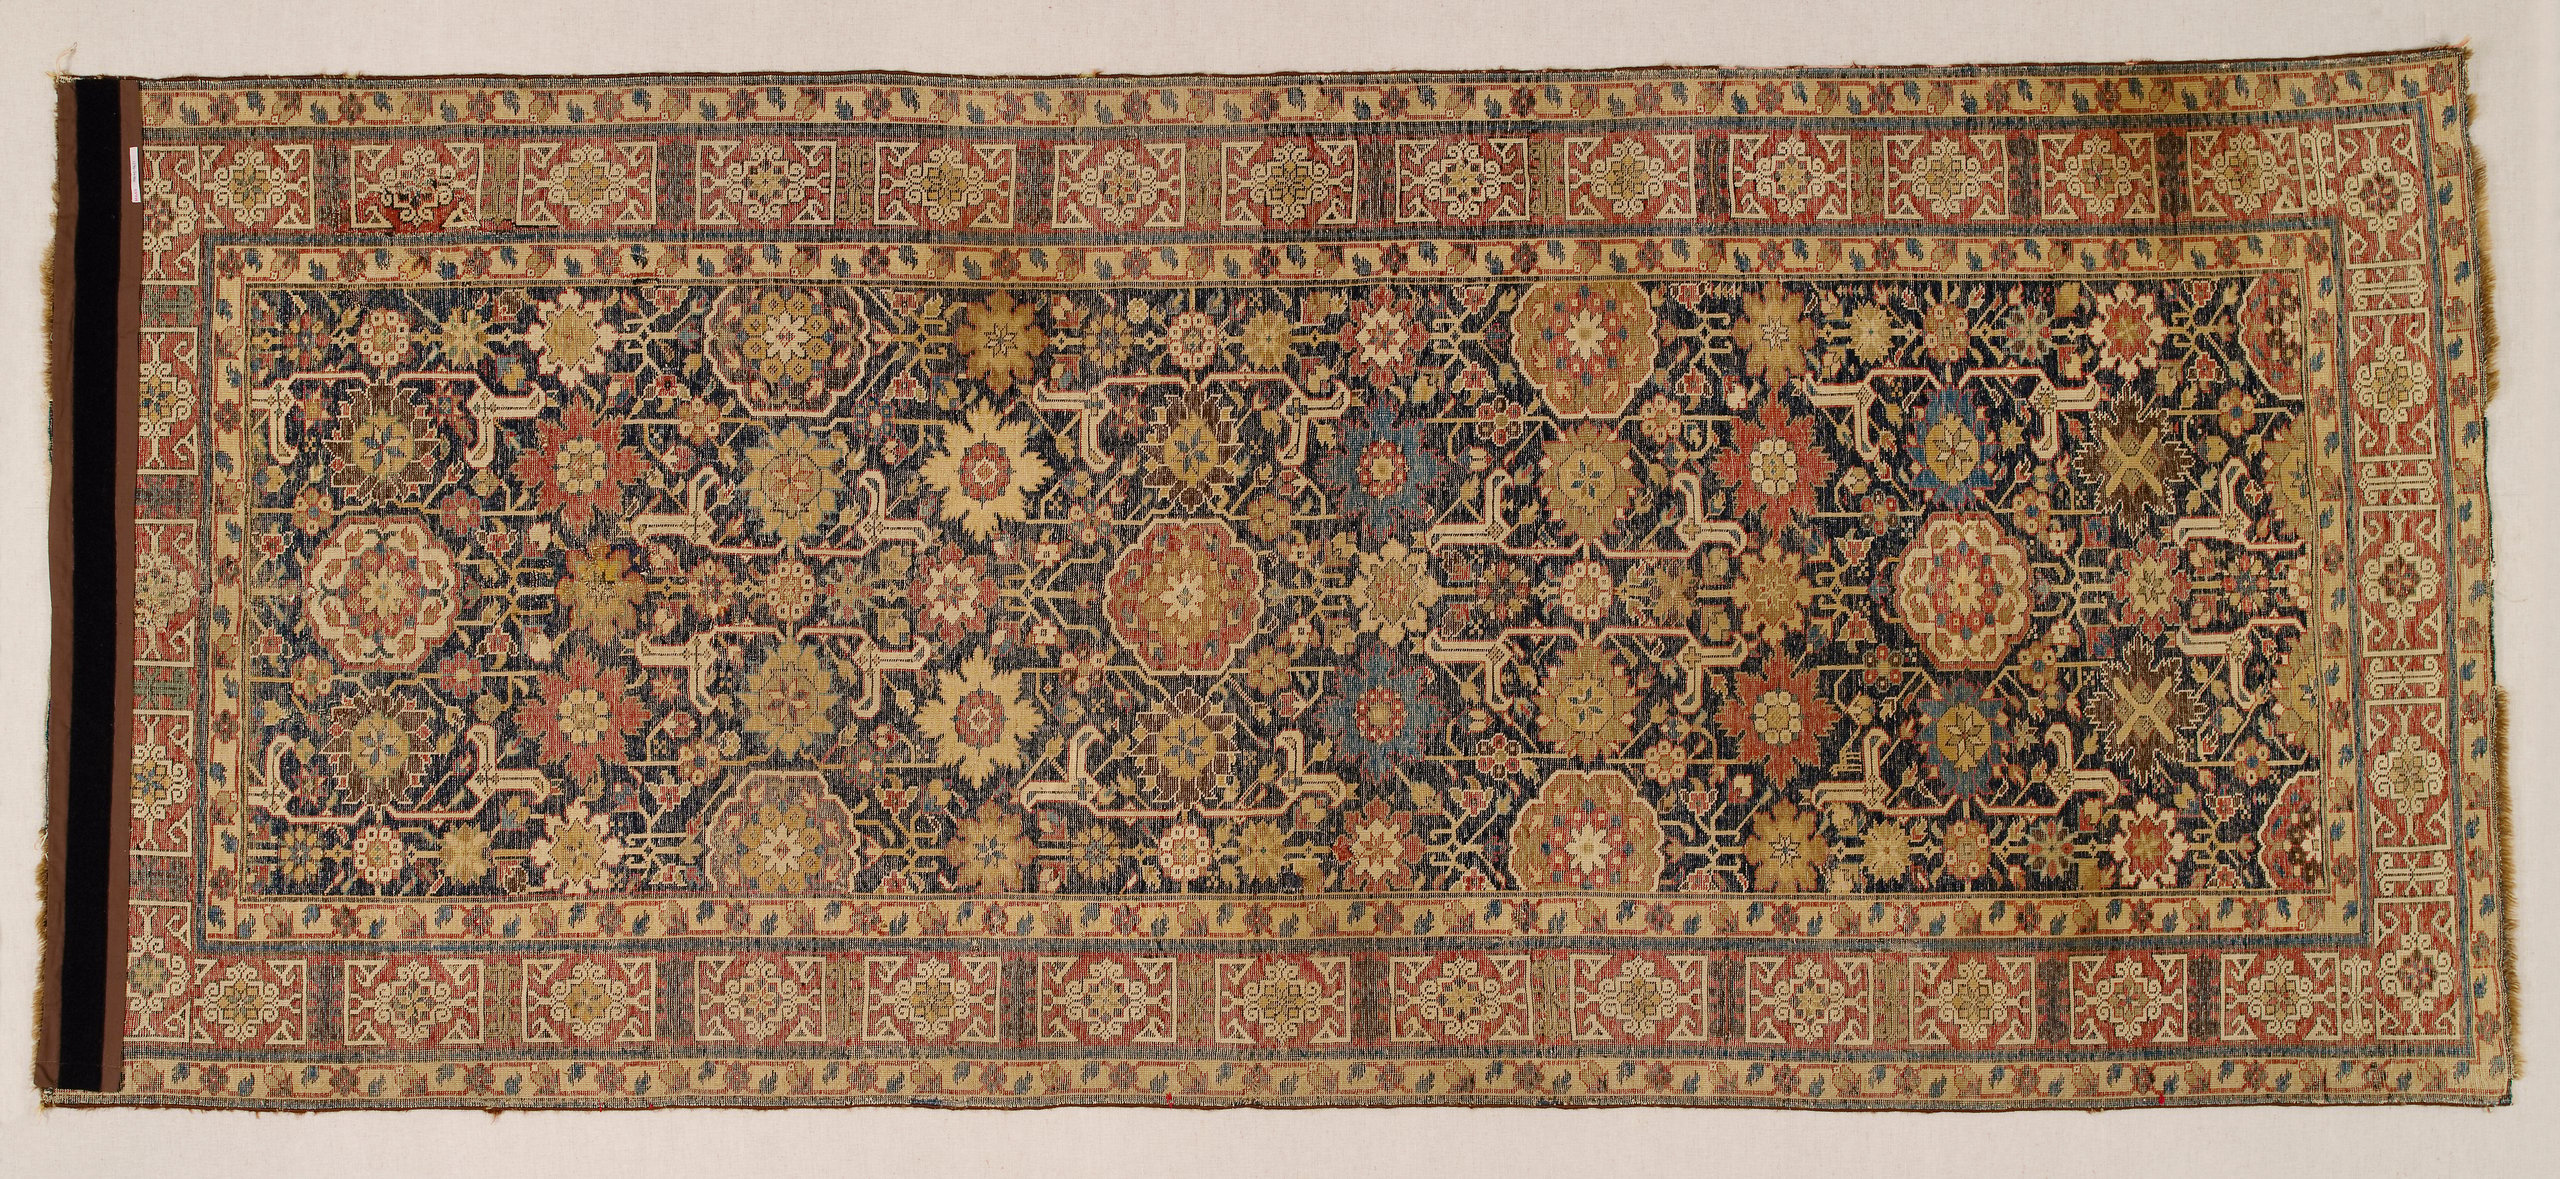 Afshan runner from the Shirvan district, Caucasus